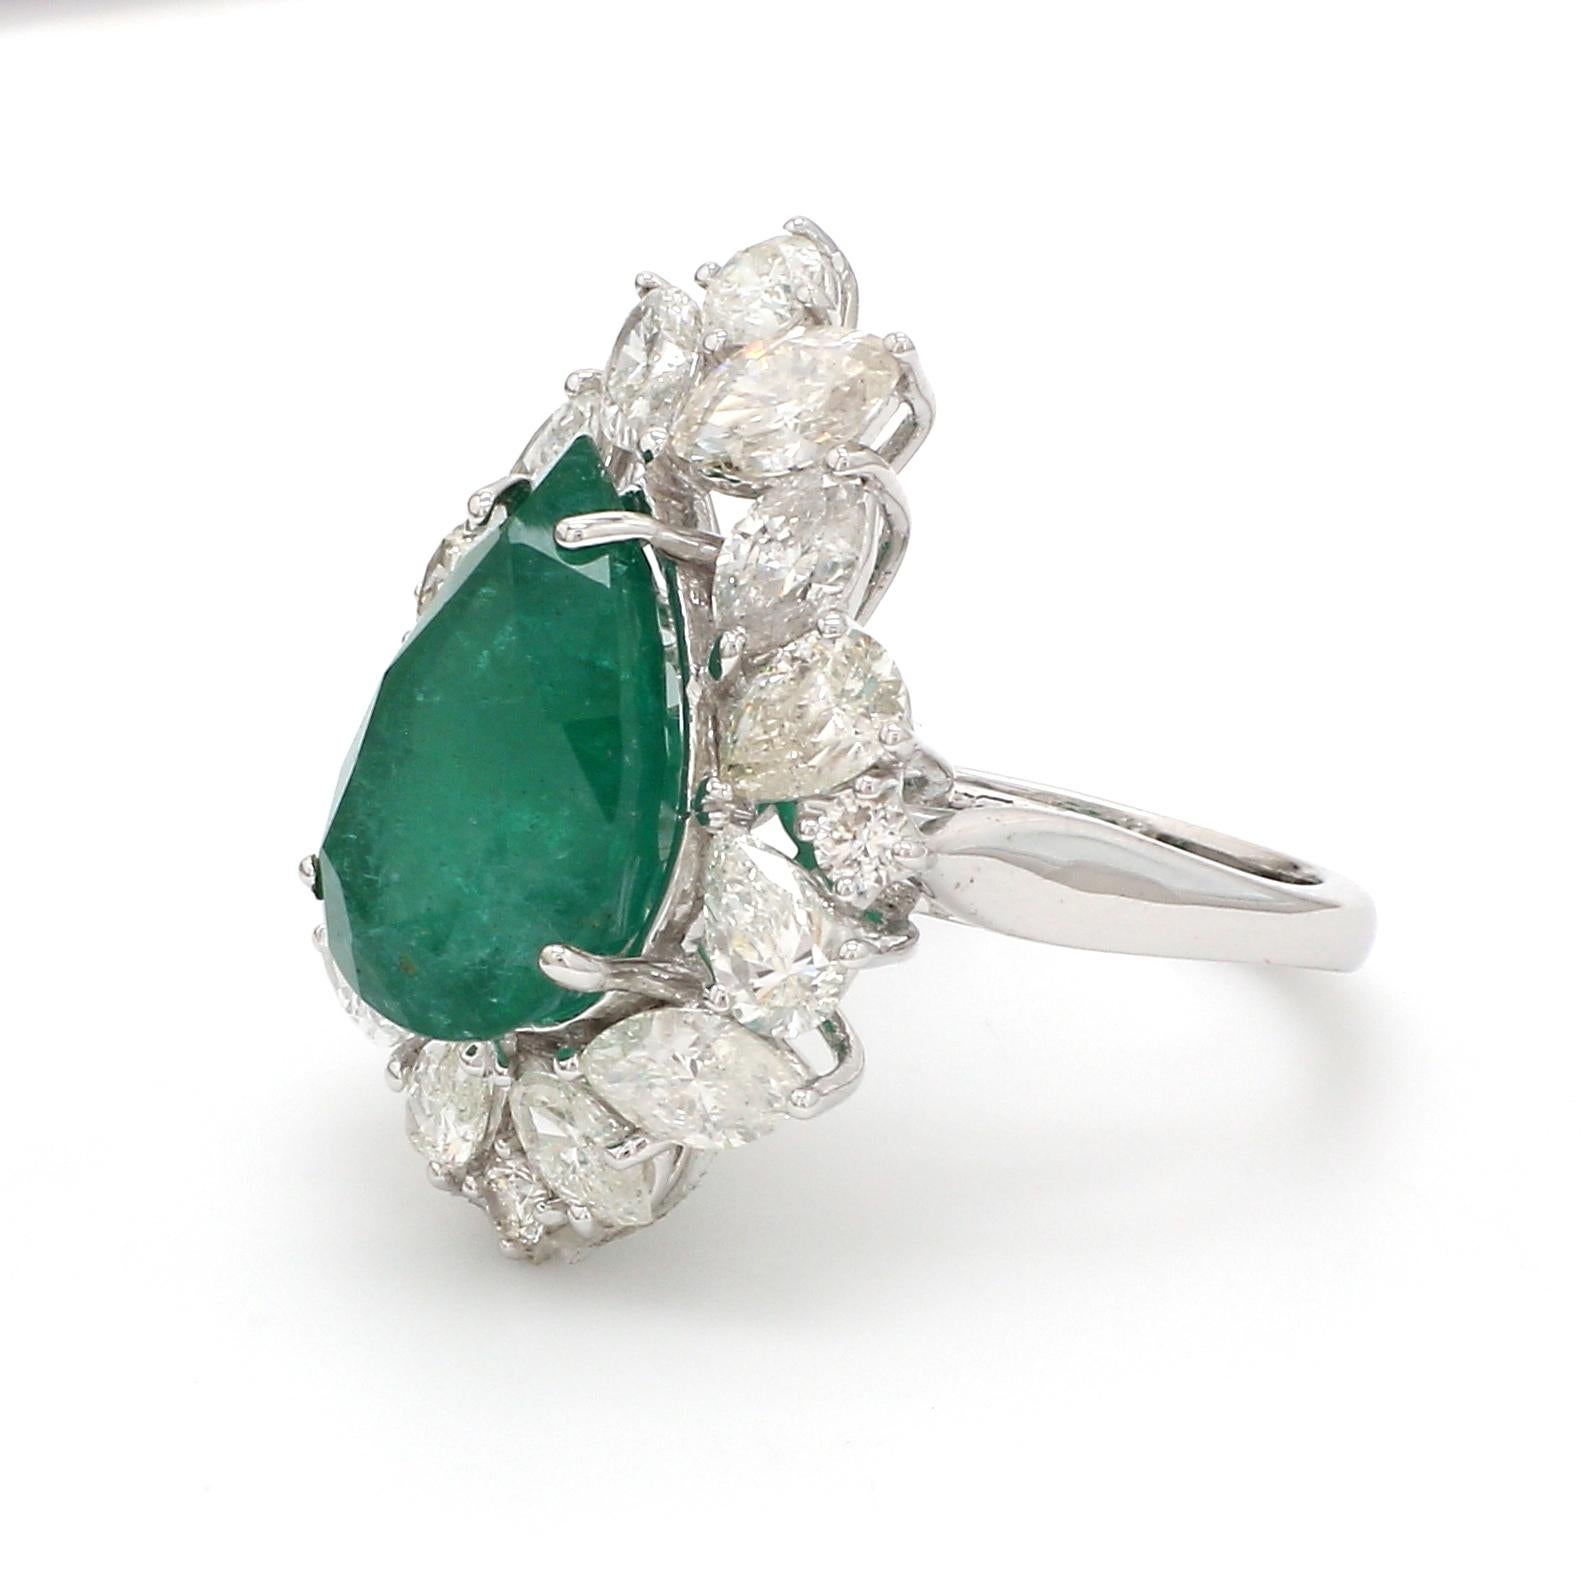 For Sale:  Pear Natural Emerald Gemstone Ring Diamond Solid 18k White Gold Fine Jewelry 6